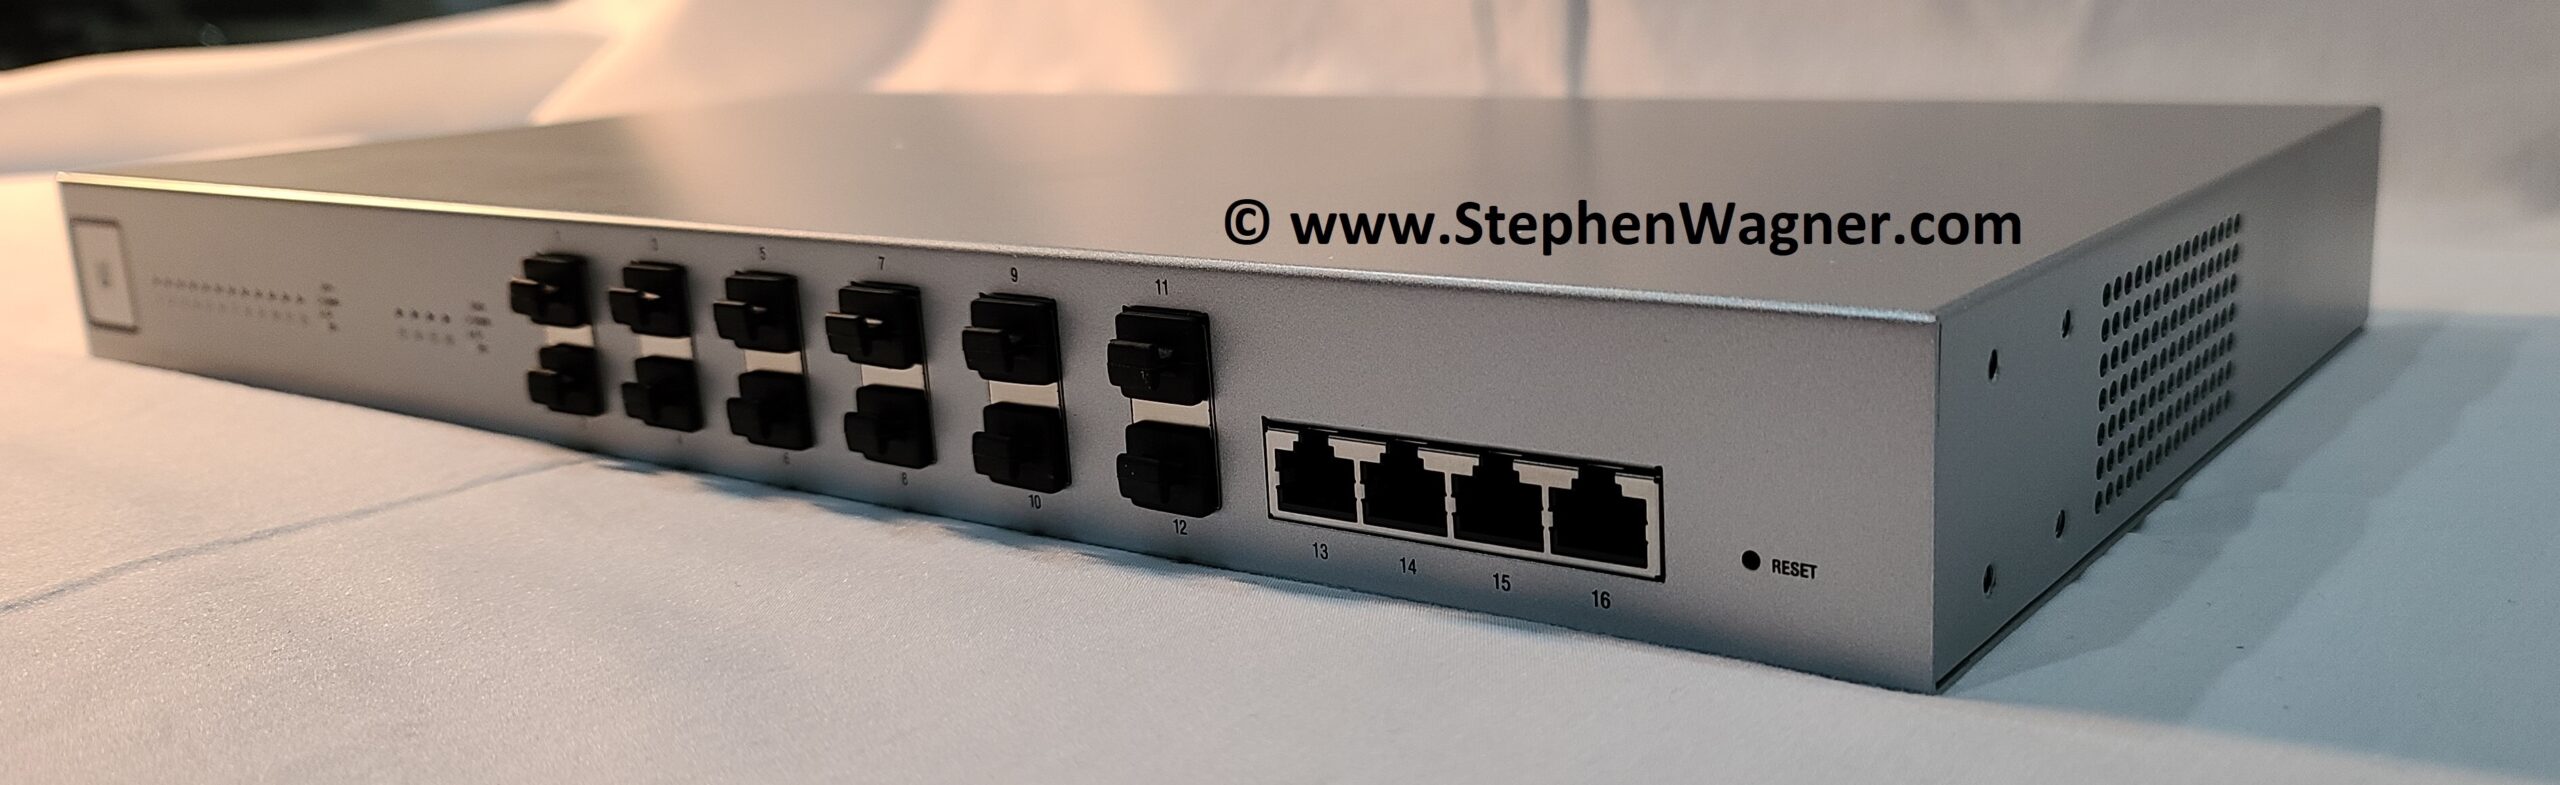 Going 10Gig with the Ubiquiti UniFi US-16-XG Switch - Review - The Tech  Journal